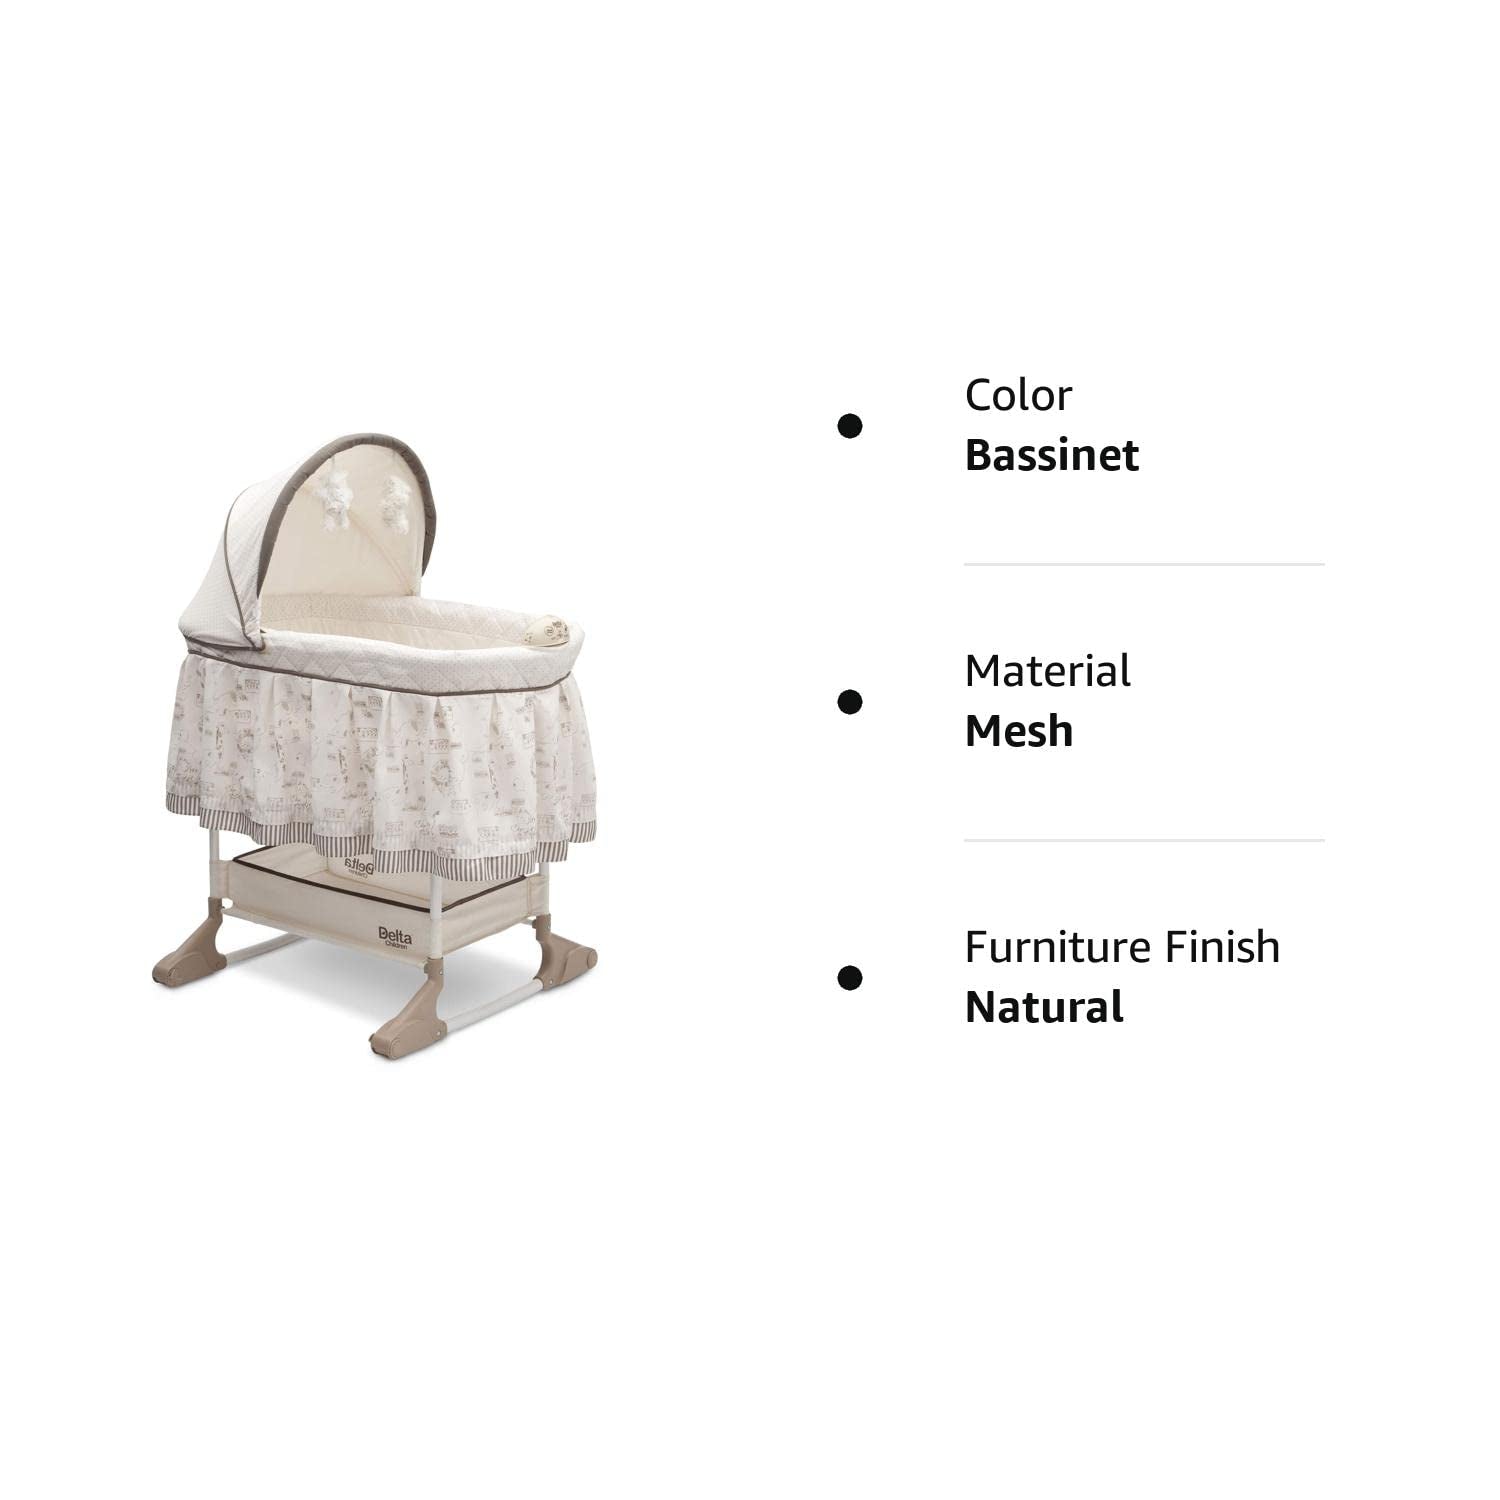 Rocking Bedside Bassinet - Portable Crib with Lights Sounds and Vibrations, Play Time Jungle - Design By Technique